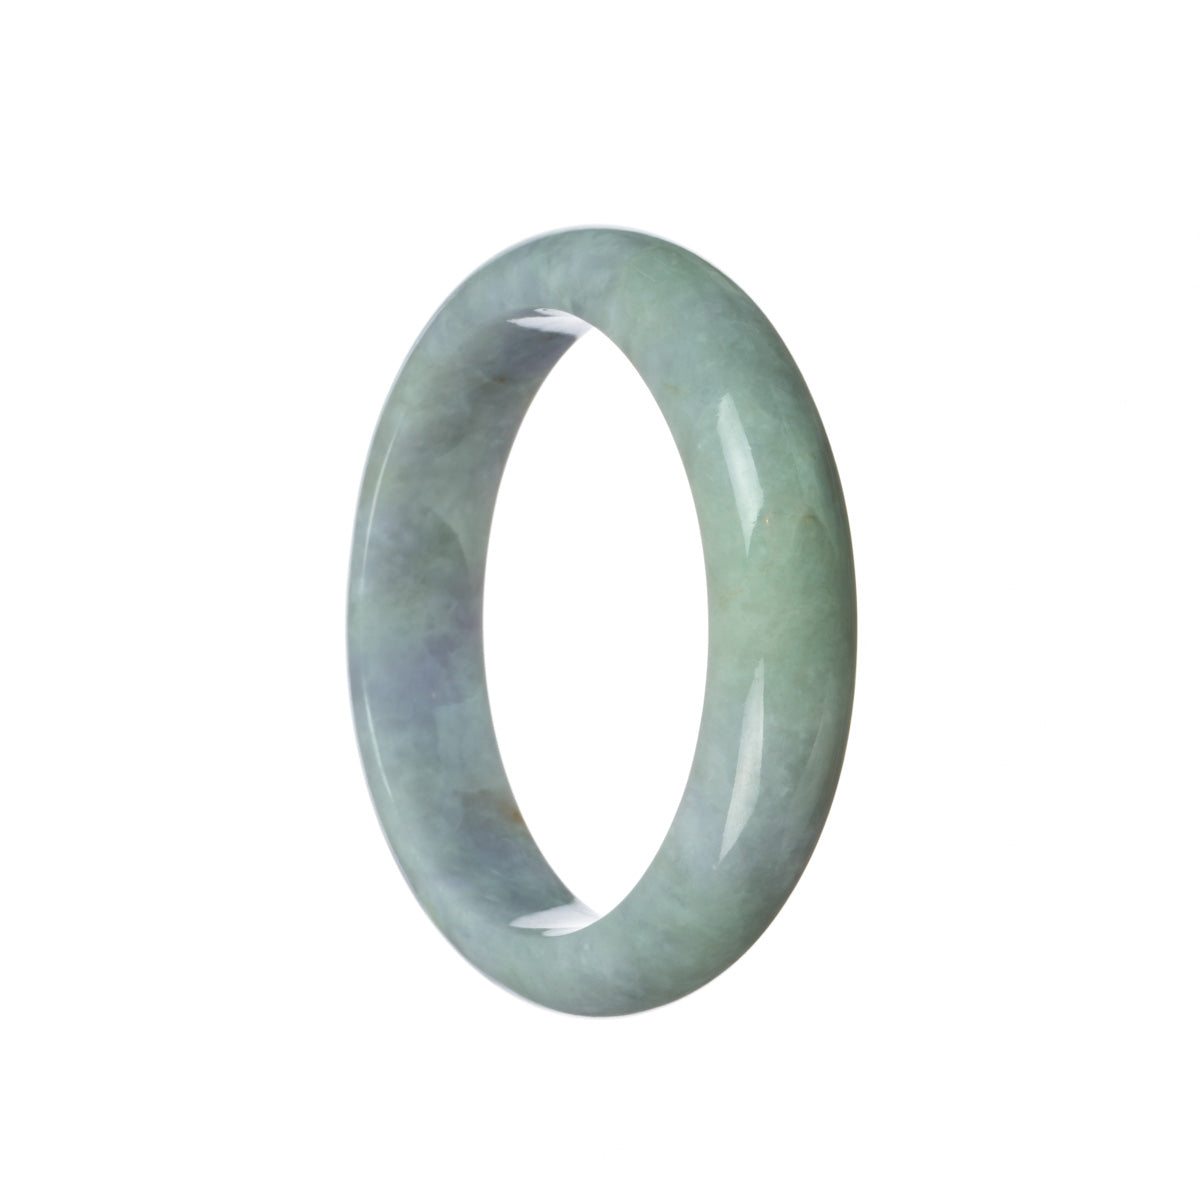 A lavender-colored jade bangle bracelet with a half moon shape, showcasing its natural beauty. The bracelet is made of genuine, traditional jade and features a stunning green hue. Perfect for adding a touch of elegance to any outfit.